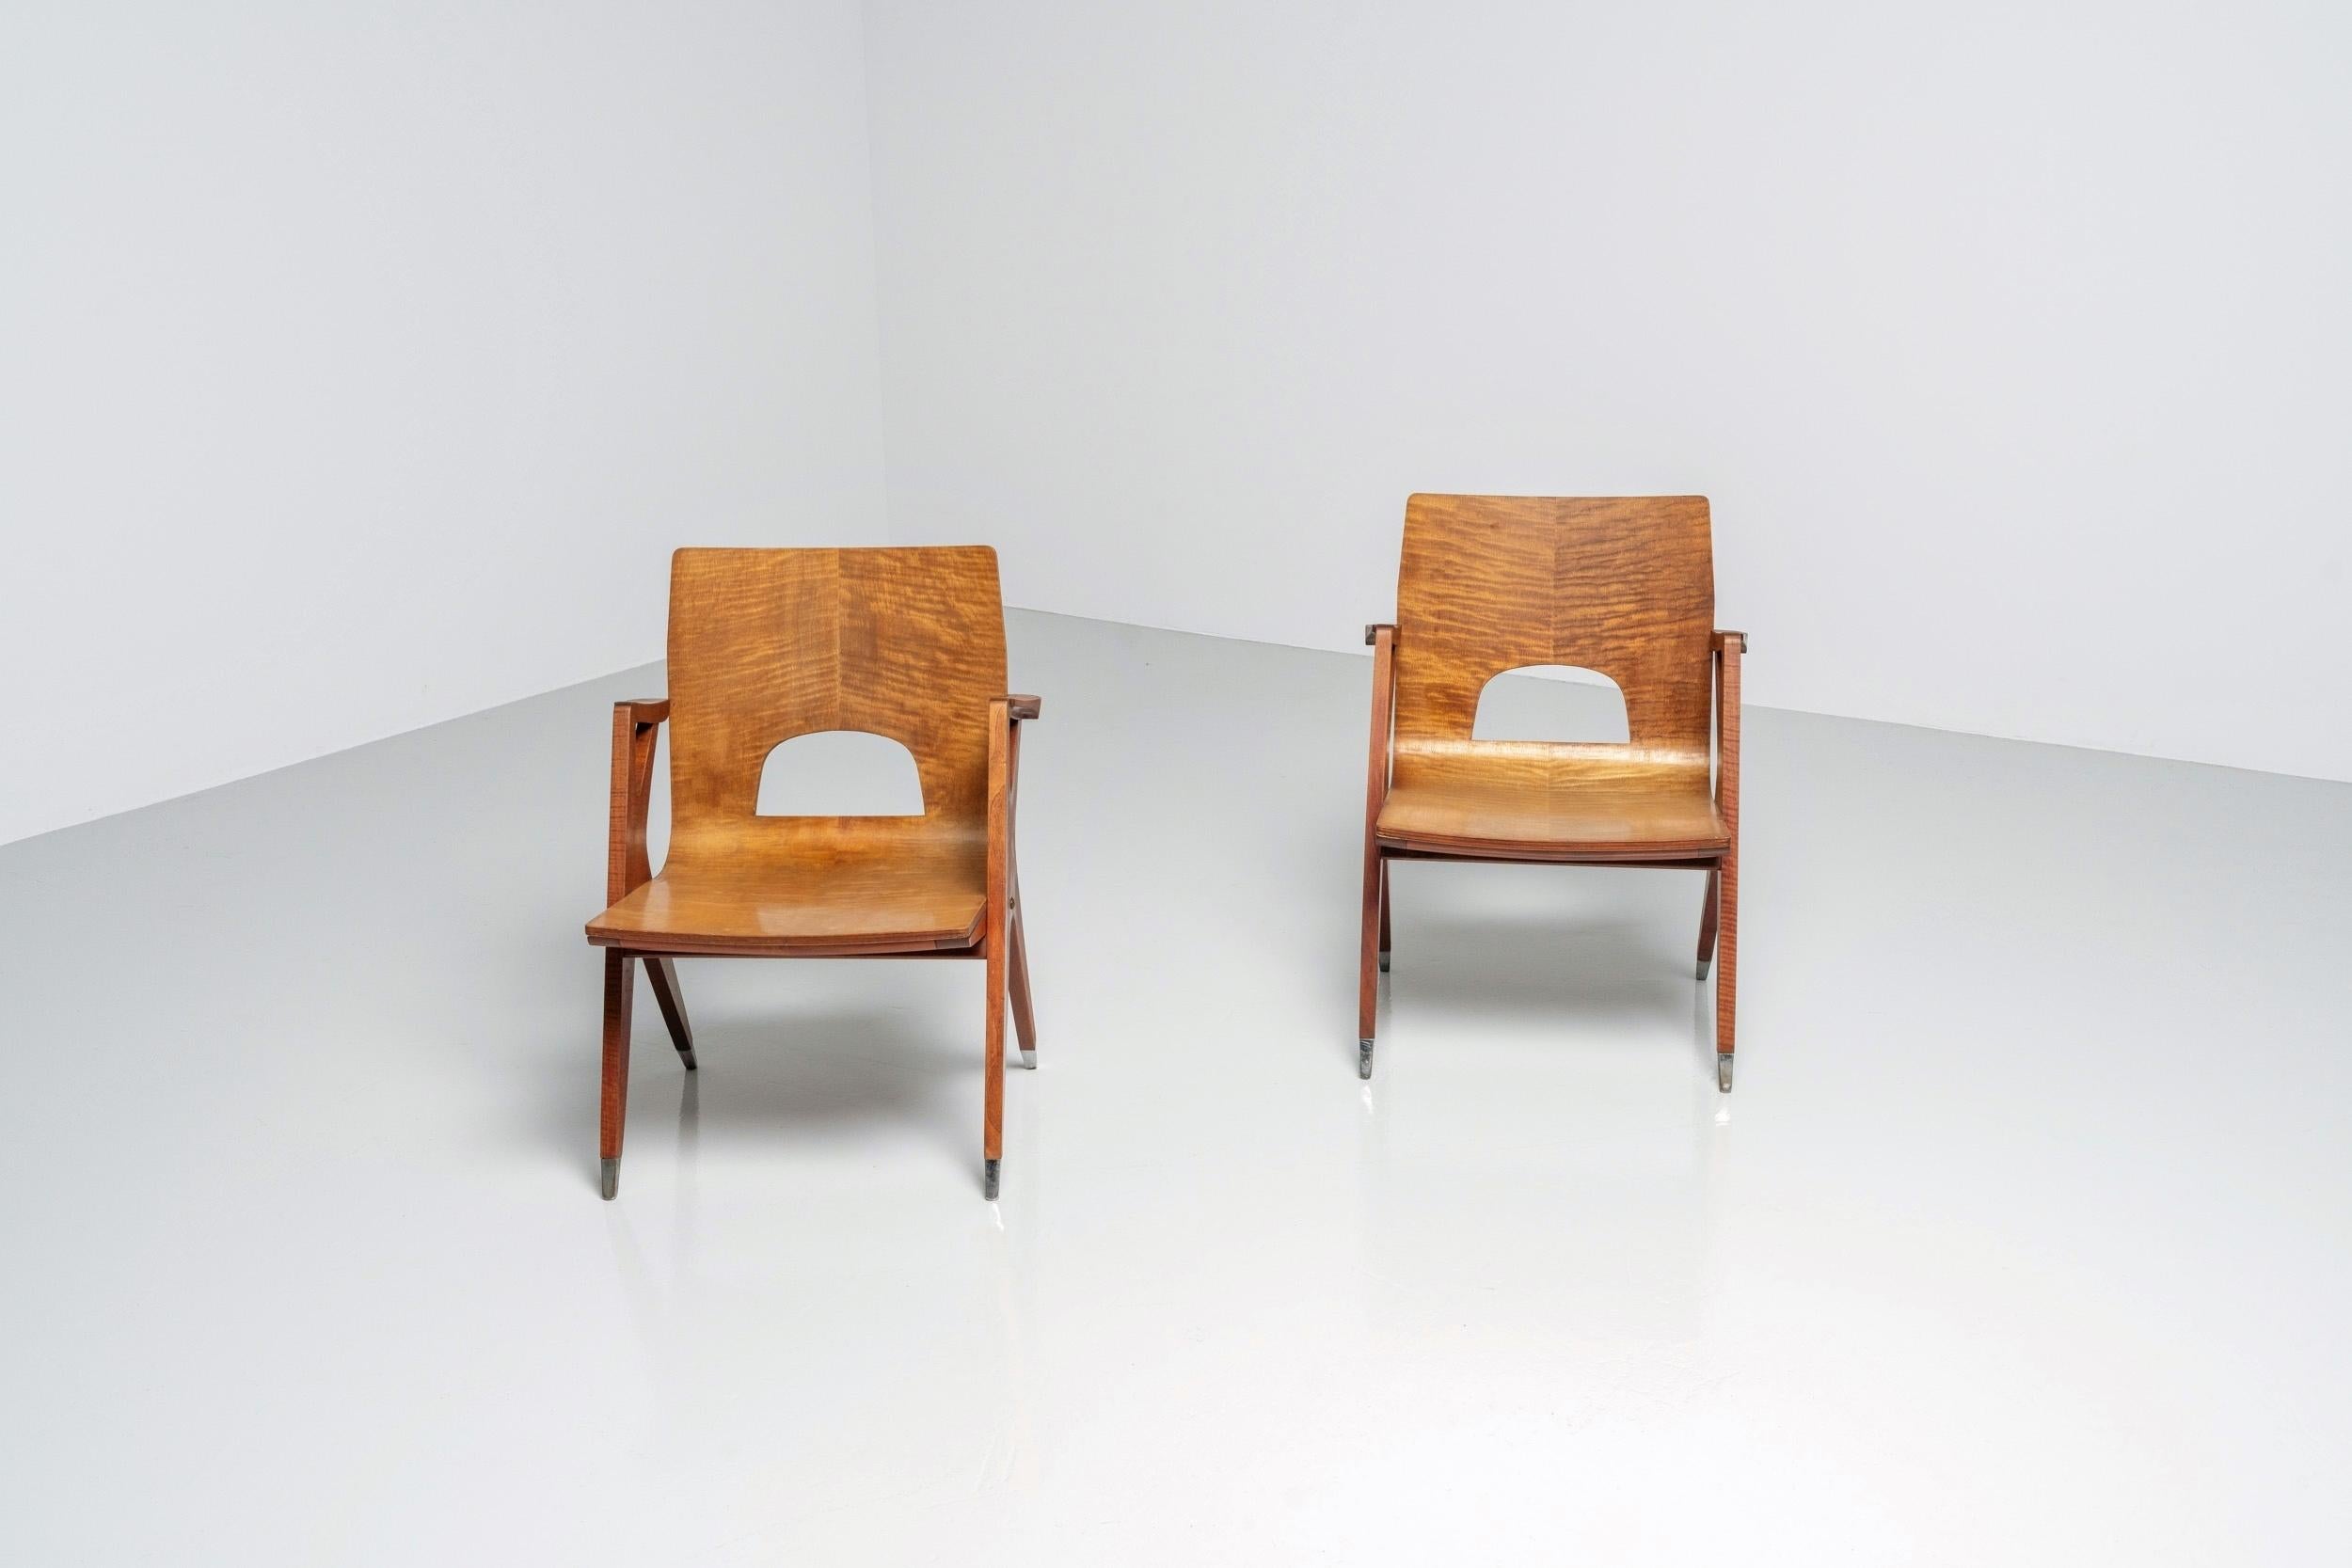 Beautiful shaped plywood lounge chairs attributed to a design by Ico Parisi pre MIM, Italy 1950. These chairs have a birch plywood seat with cherry backs. The two tone wood is very nice and often used in the designs by Parisi and gives the chairs an